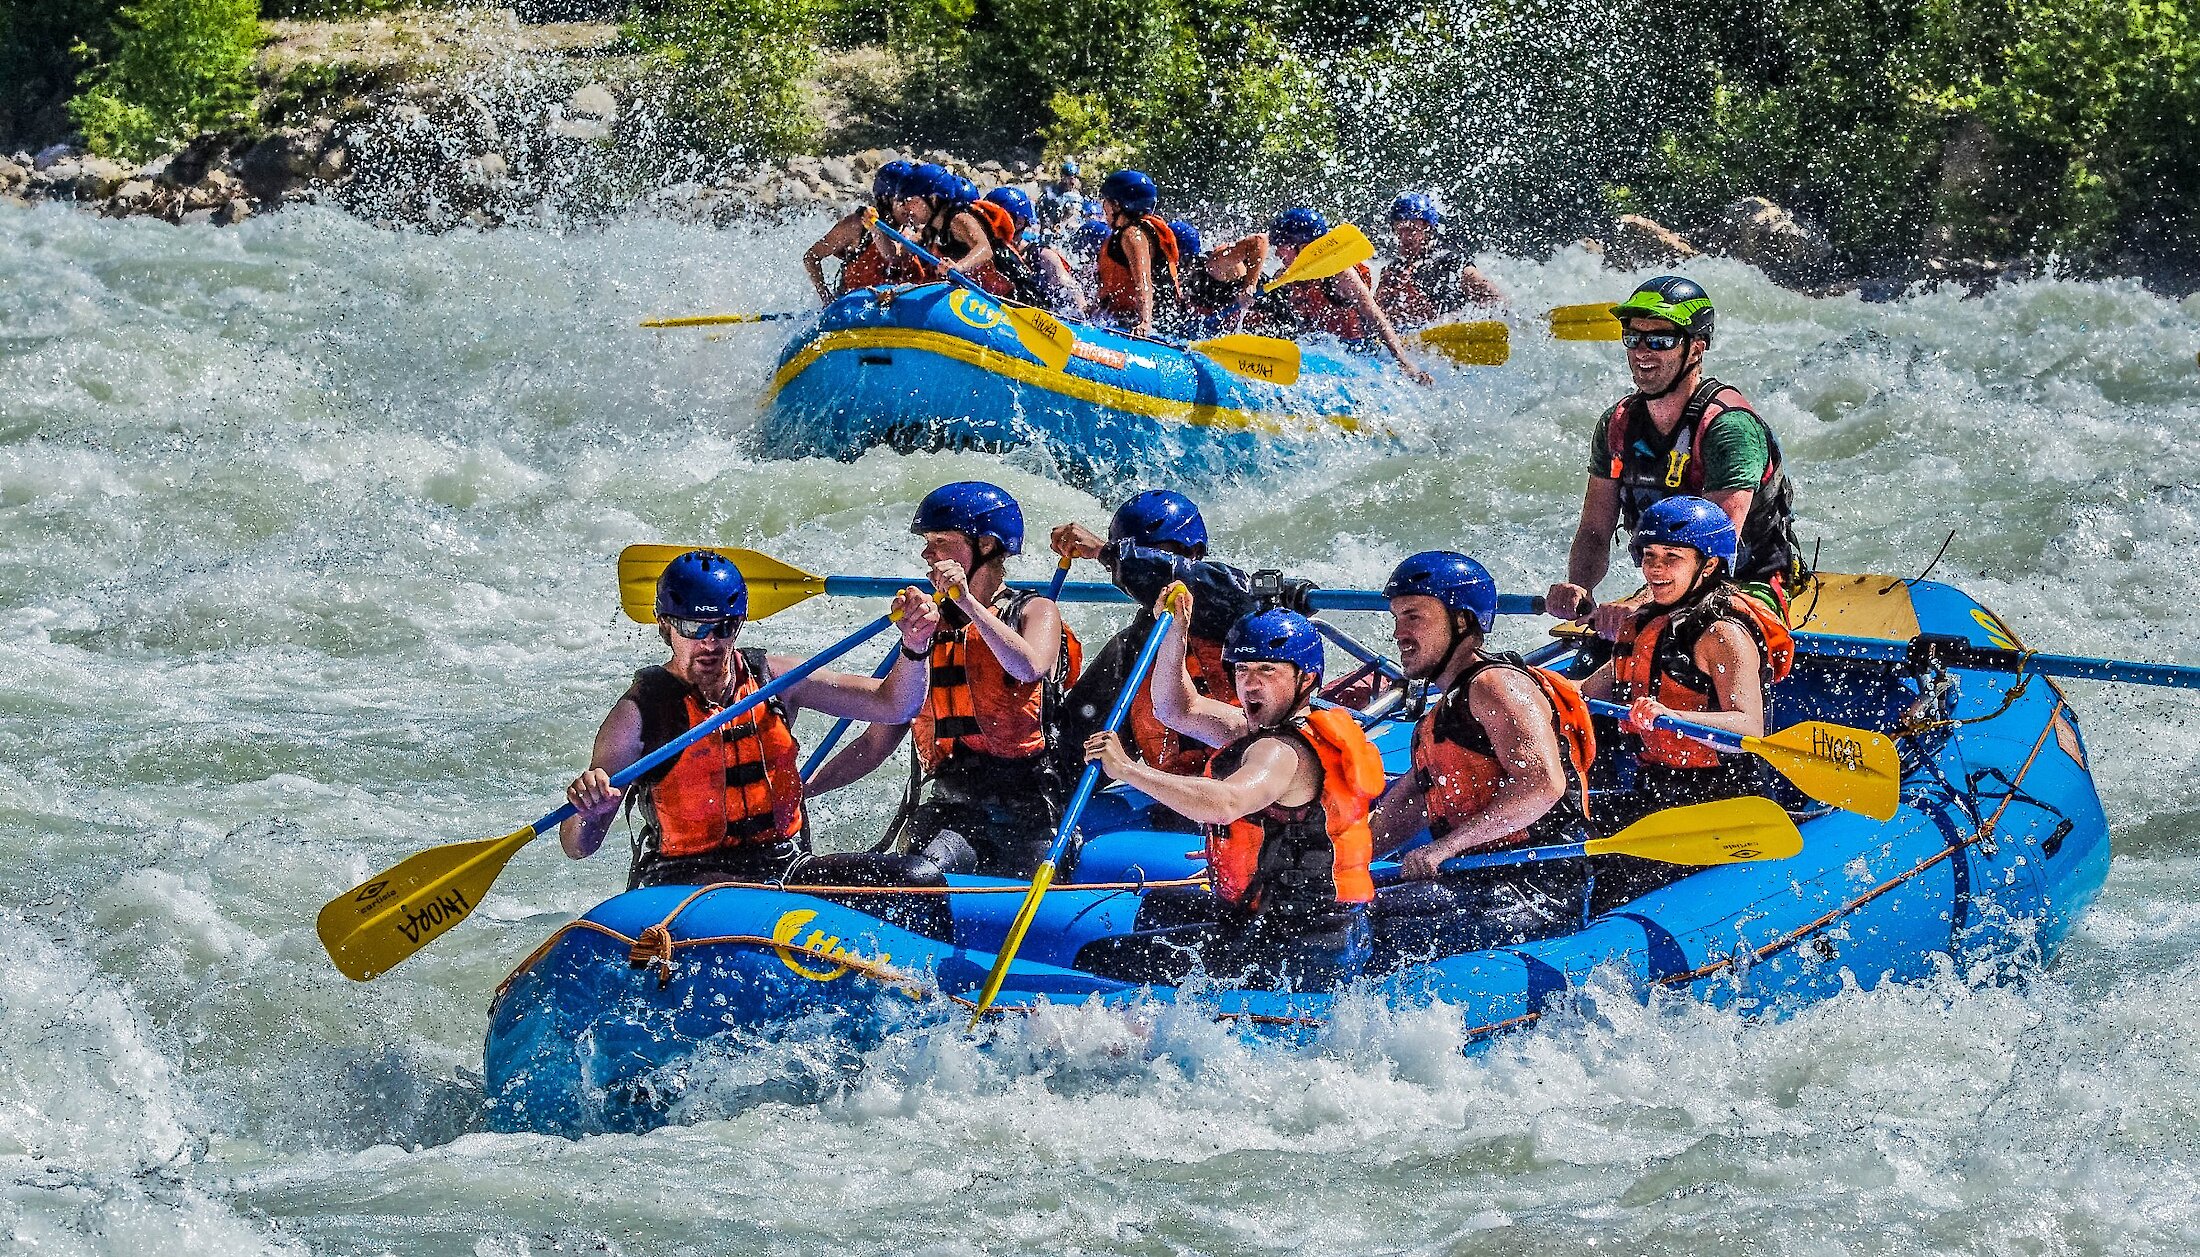 Rafting the rapids of the Kicking Horse River